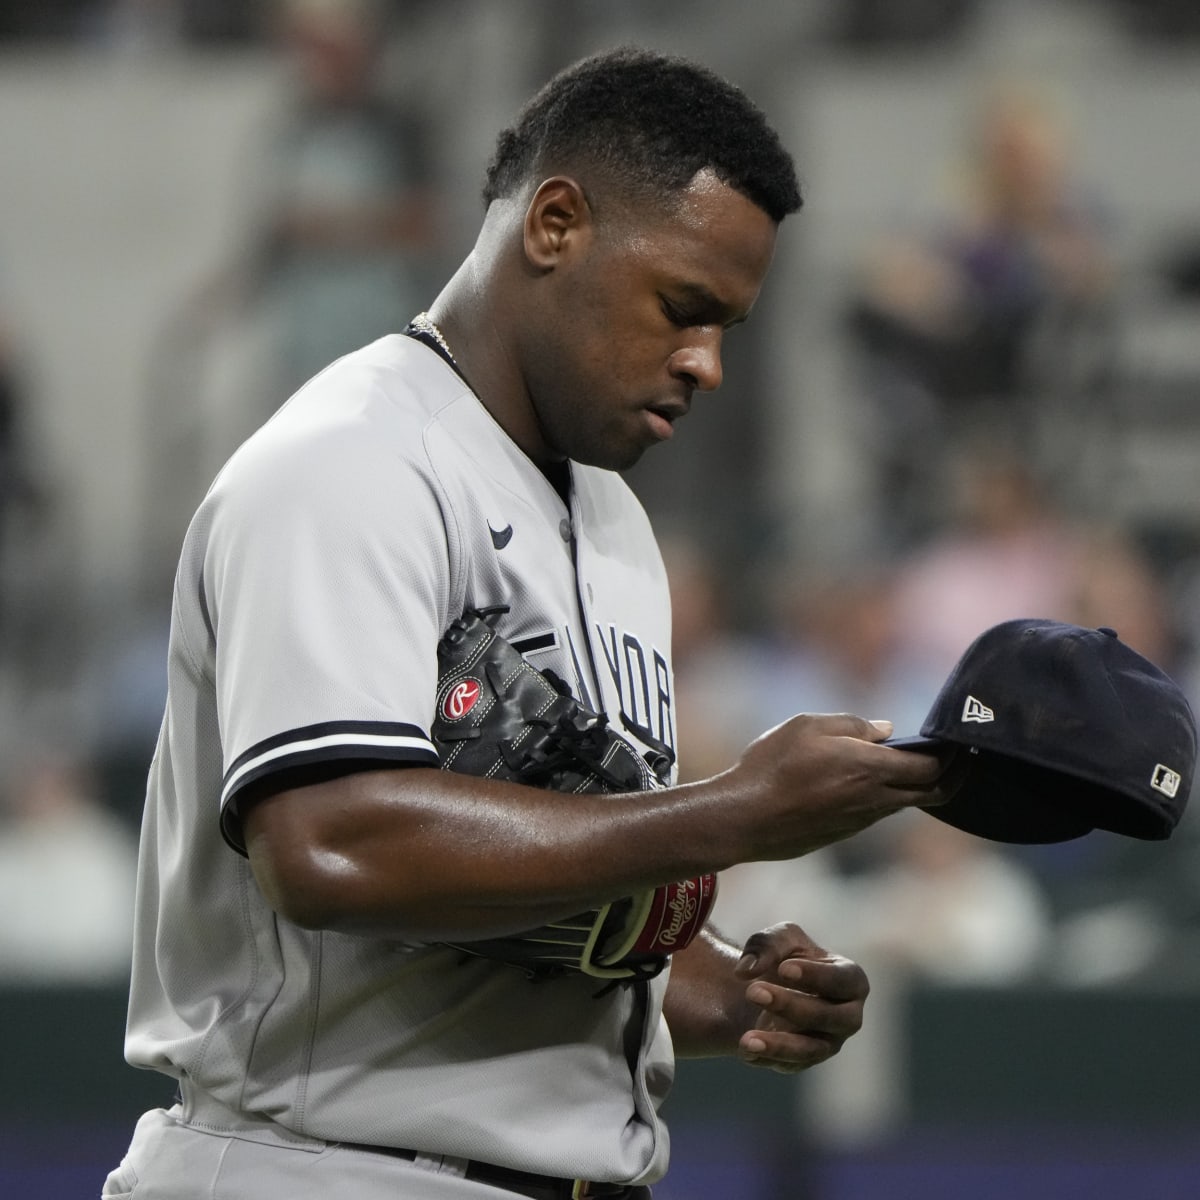 Severino 7 no-hit innings vs Texas Jung gets hit in 8th